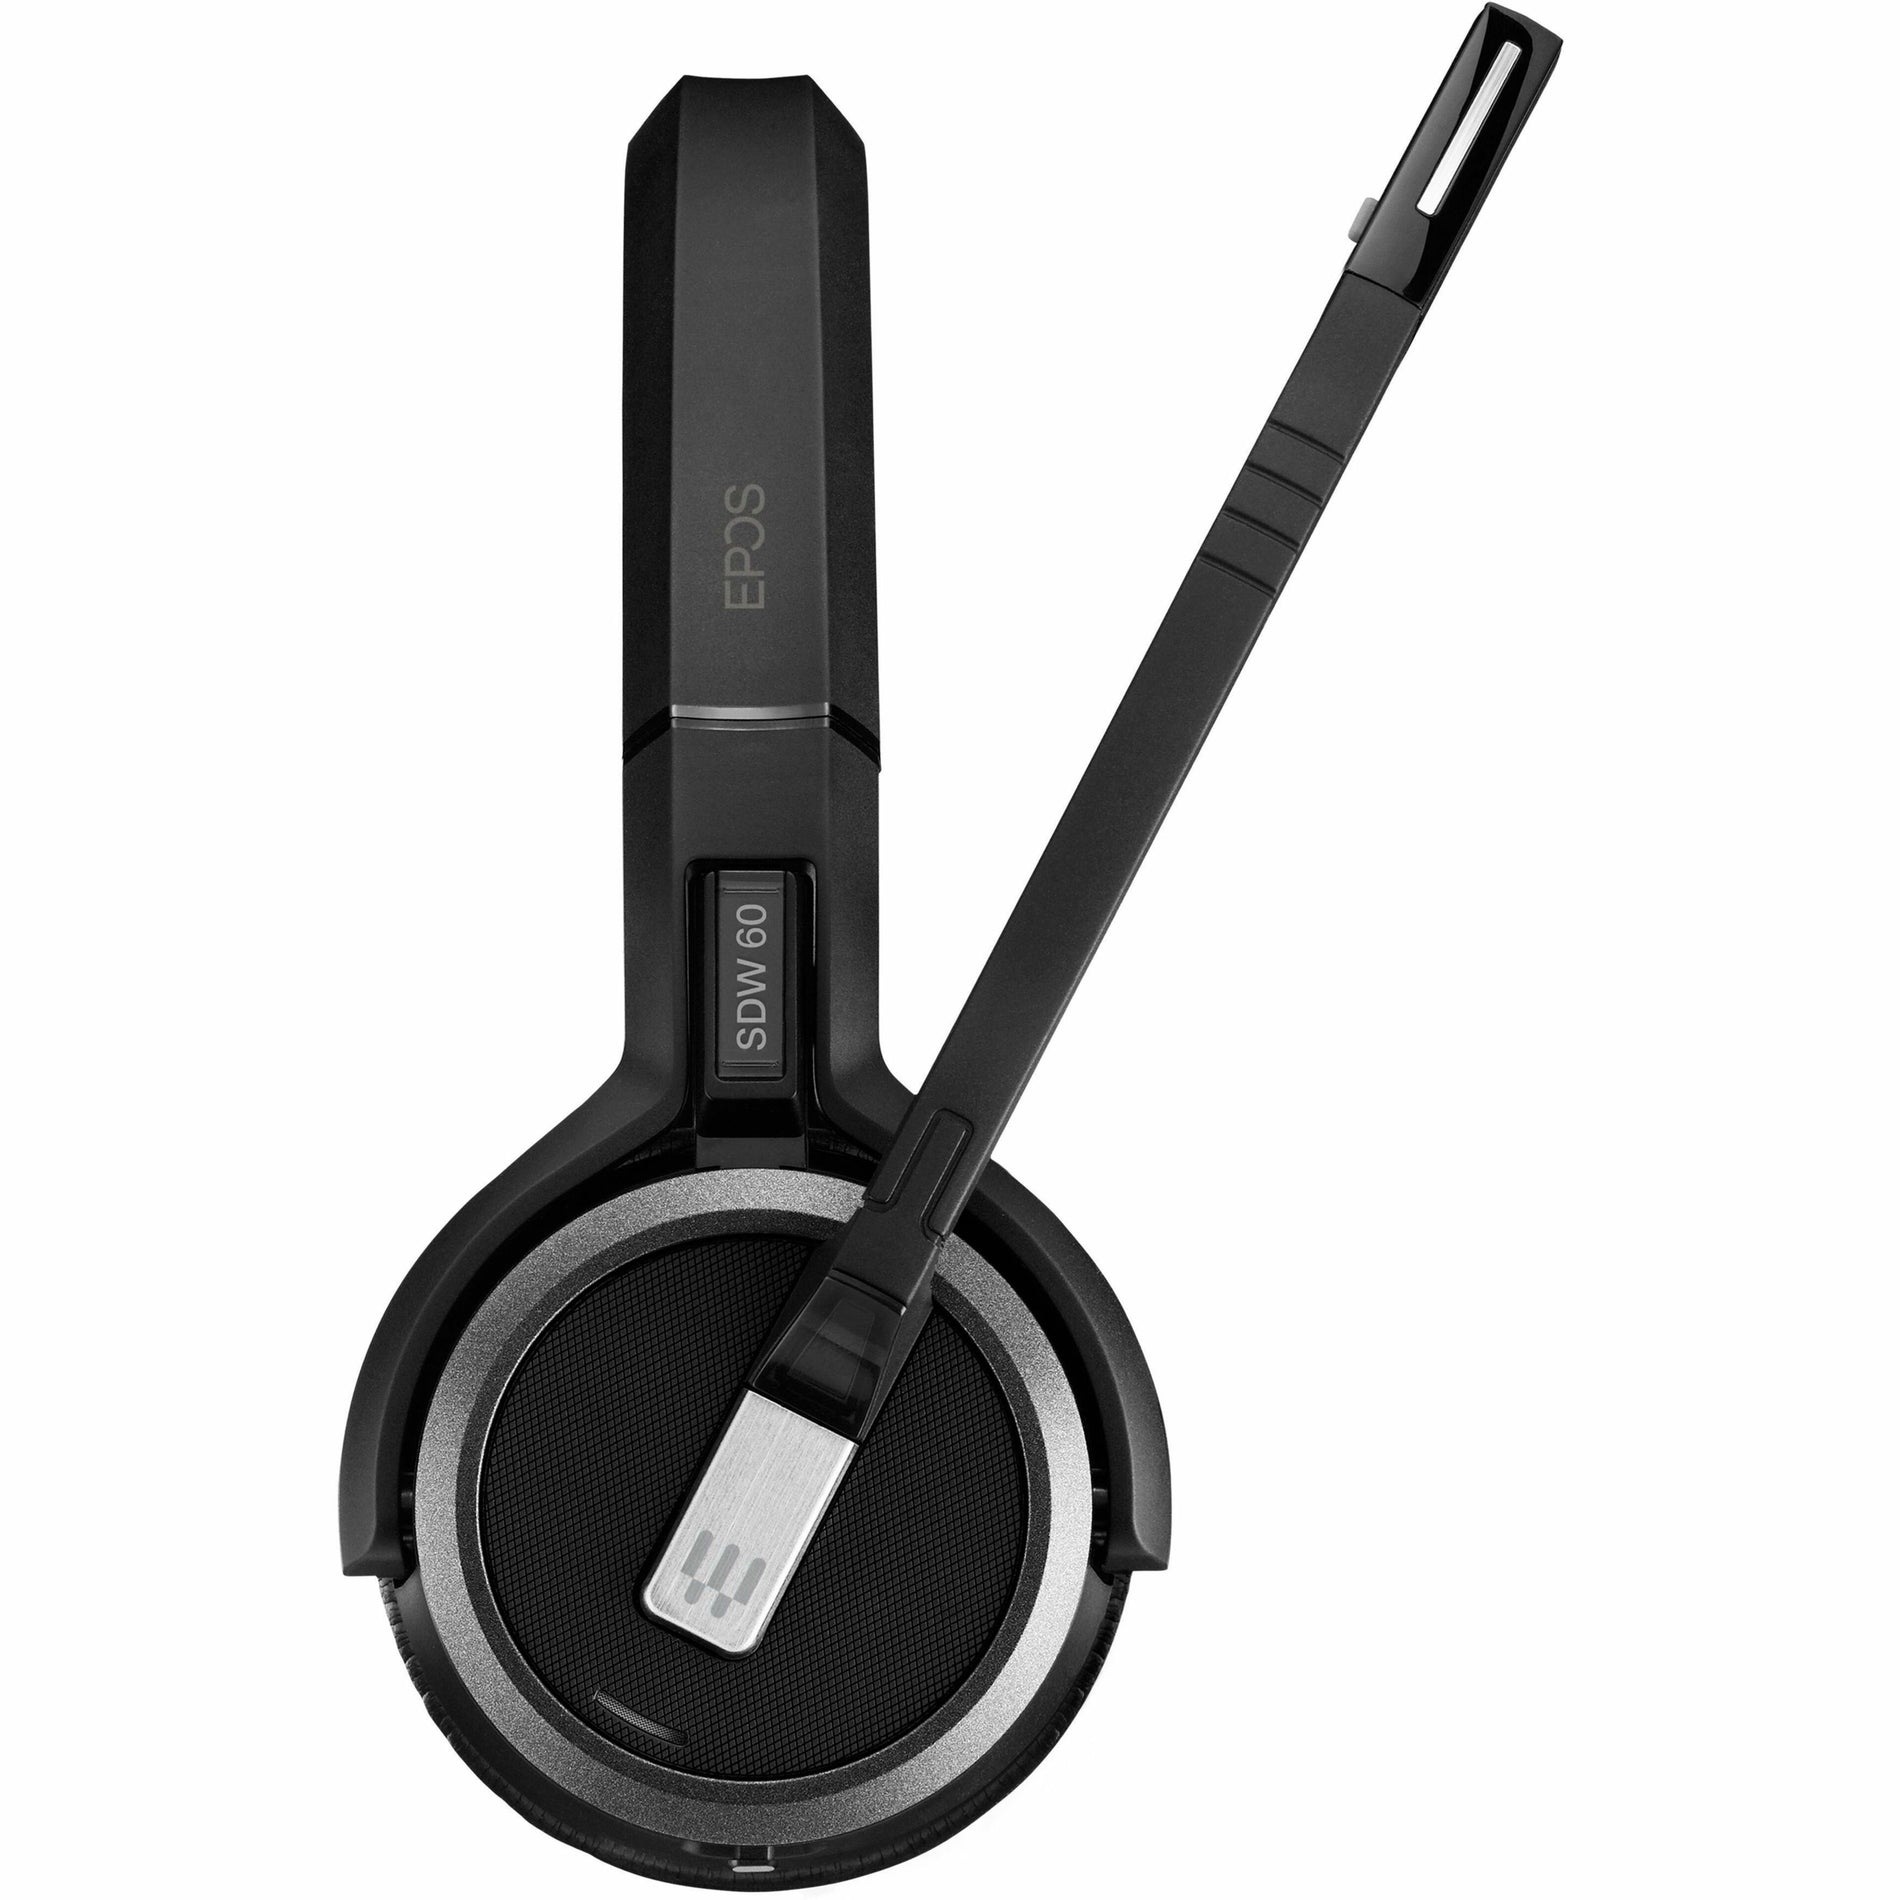 EPOS | SENNHEISER 1000605 IMPACT SDW 5065 - US Headset, Wireless On-ear Stereo Headset with Noise Cancelling and Rechargeable Battery